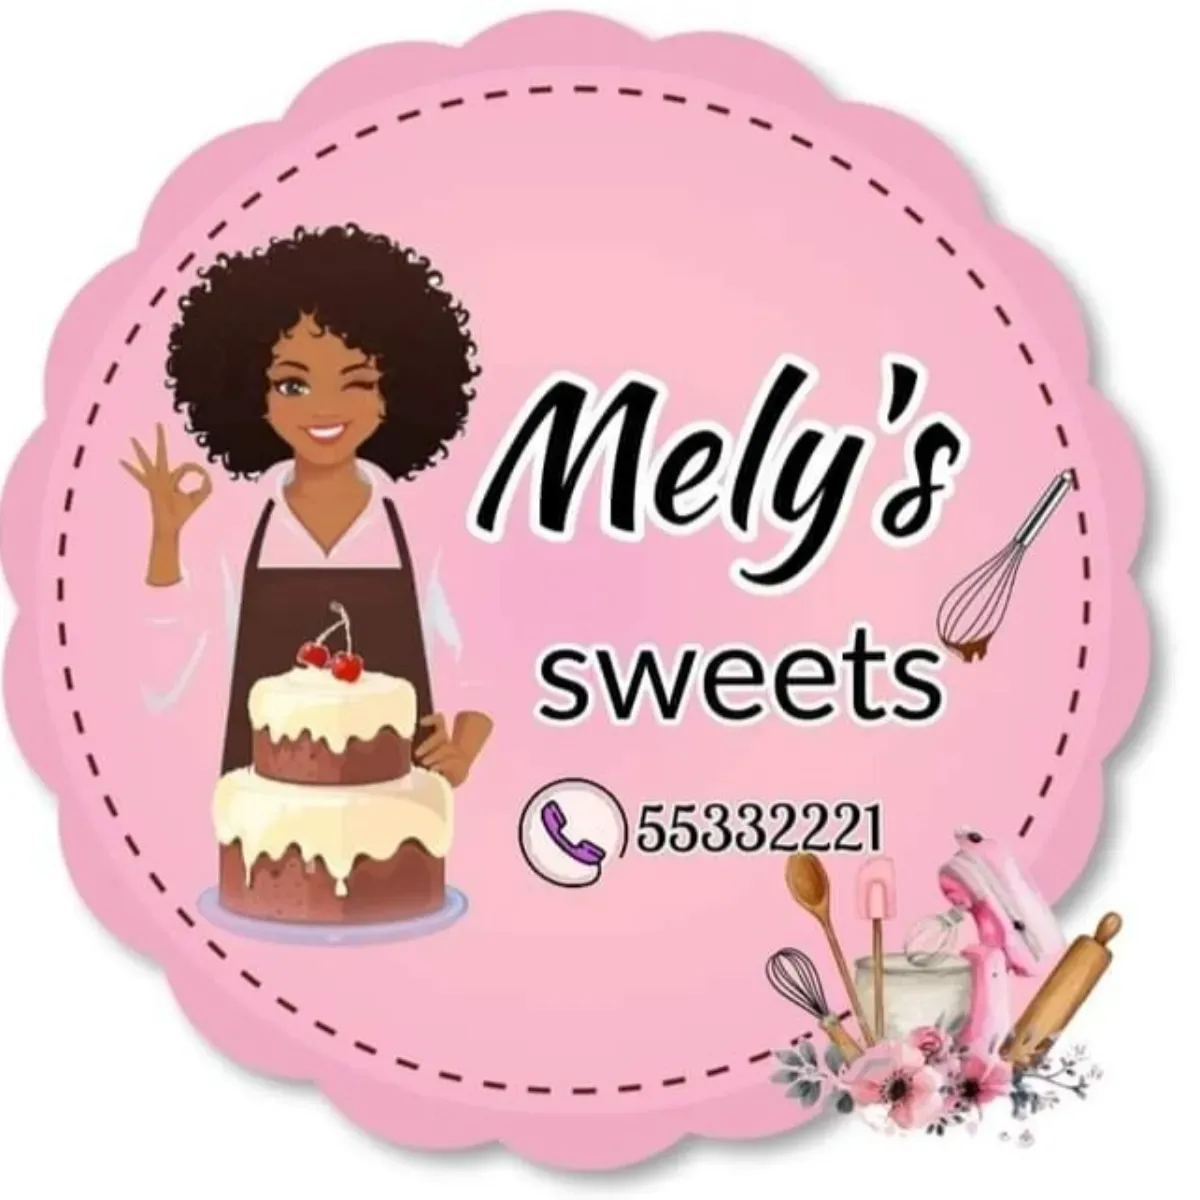 Mely's Sweets